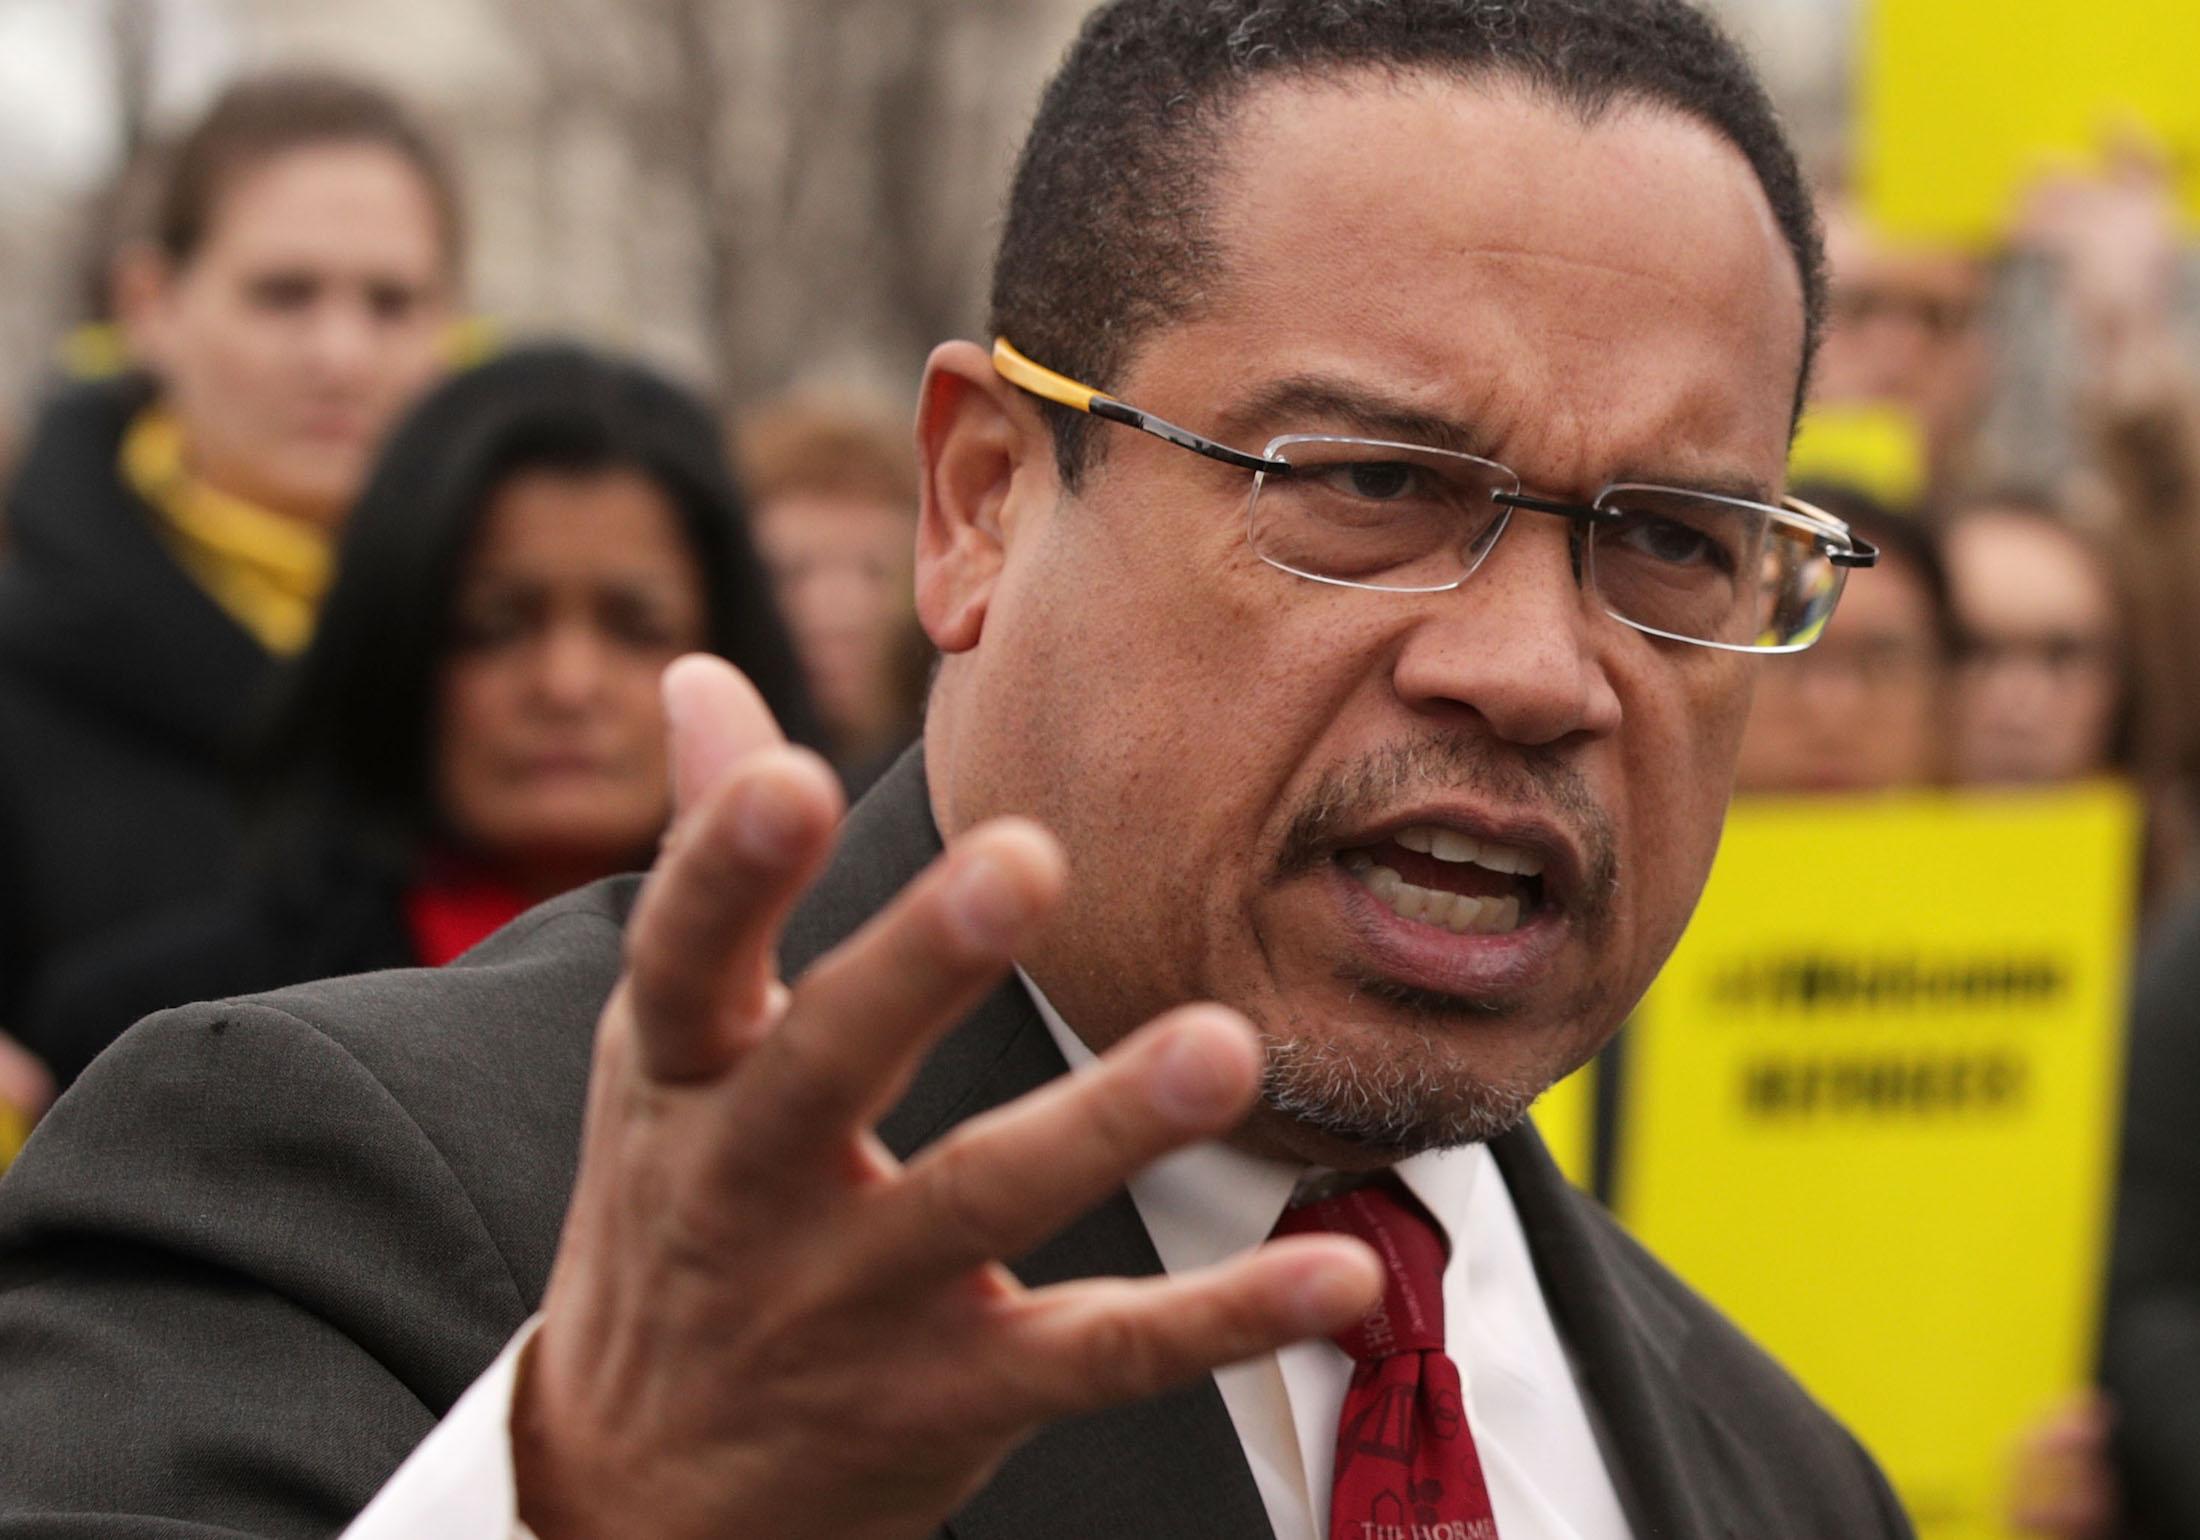 Keith Ellison speaks on Capitol Hill in Washington DC on February 1, 2017.